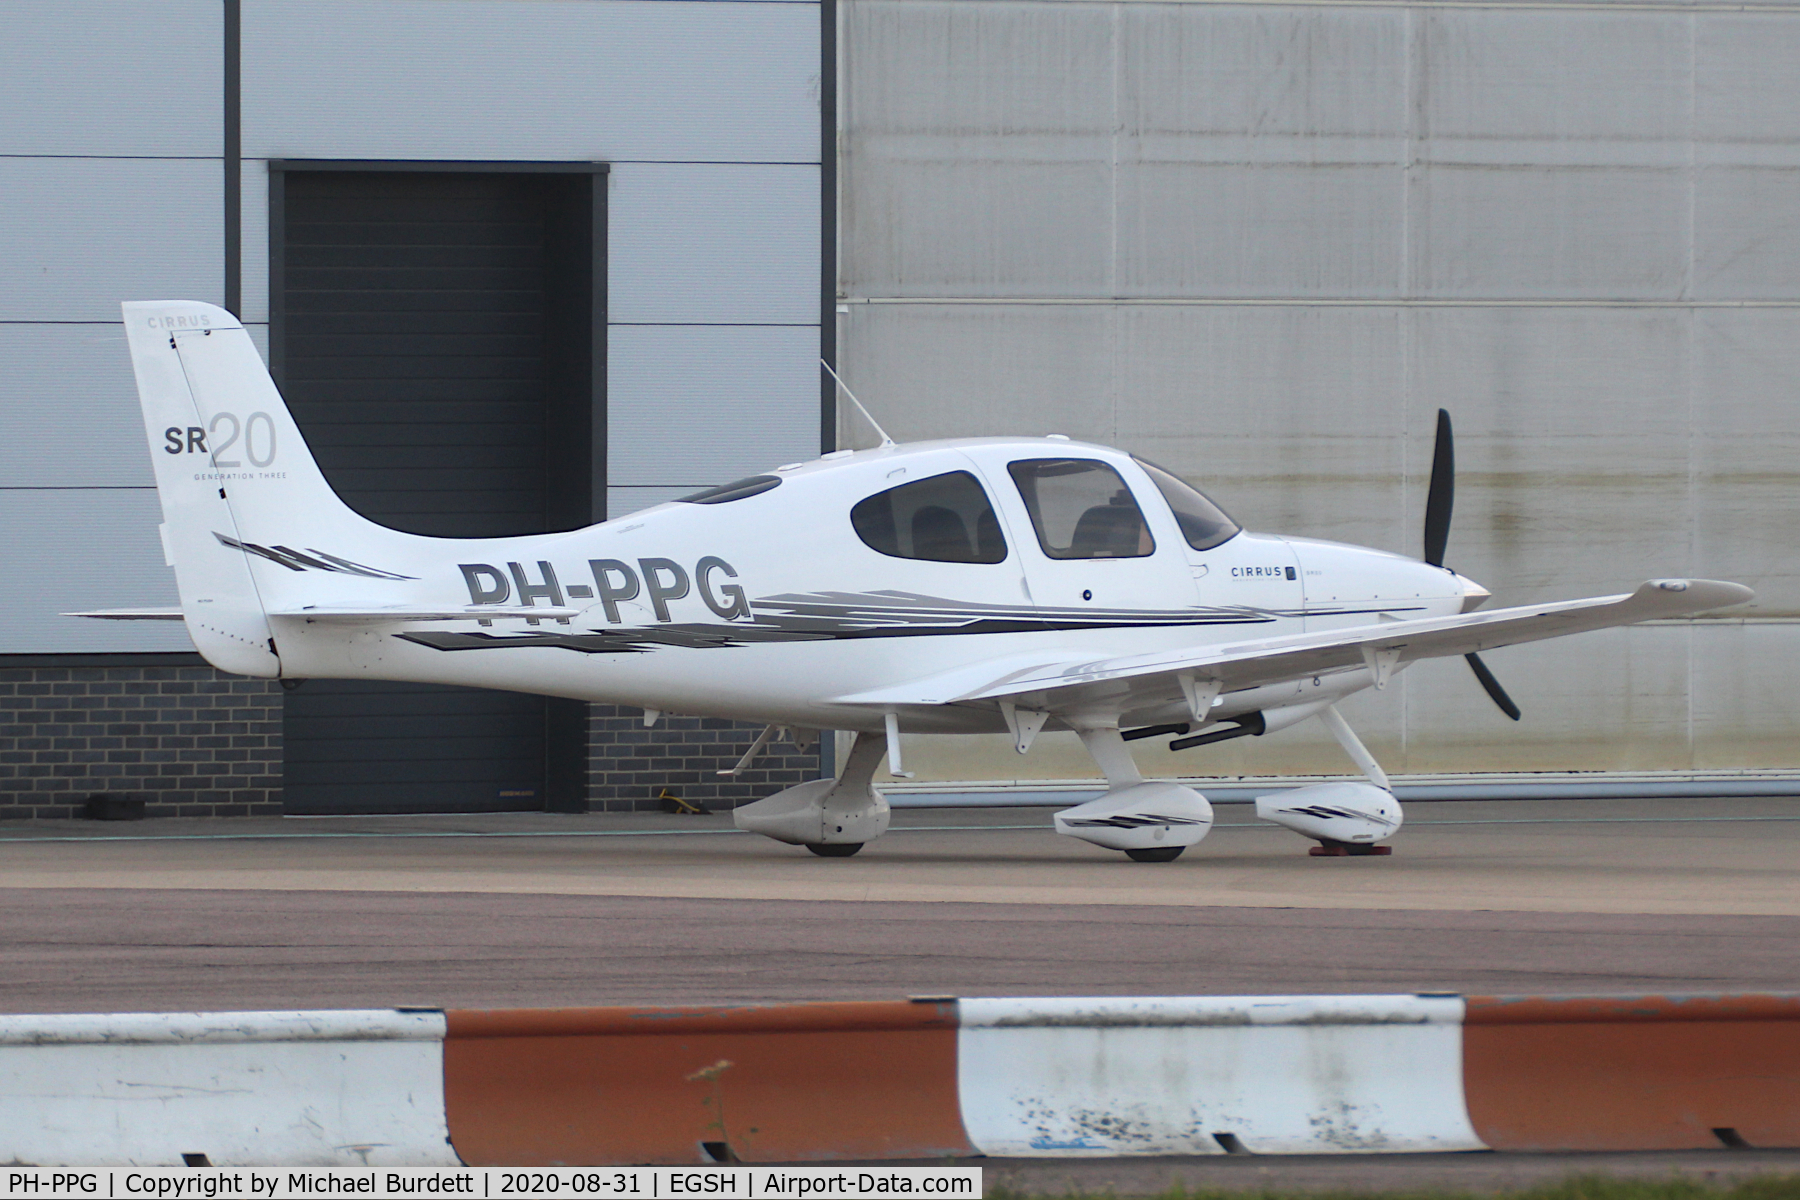 PH-PPG, 2008 Cirrus SR20 C/N 2014, Night Stopping at Norwich